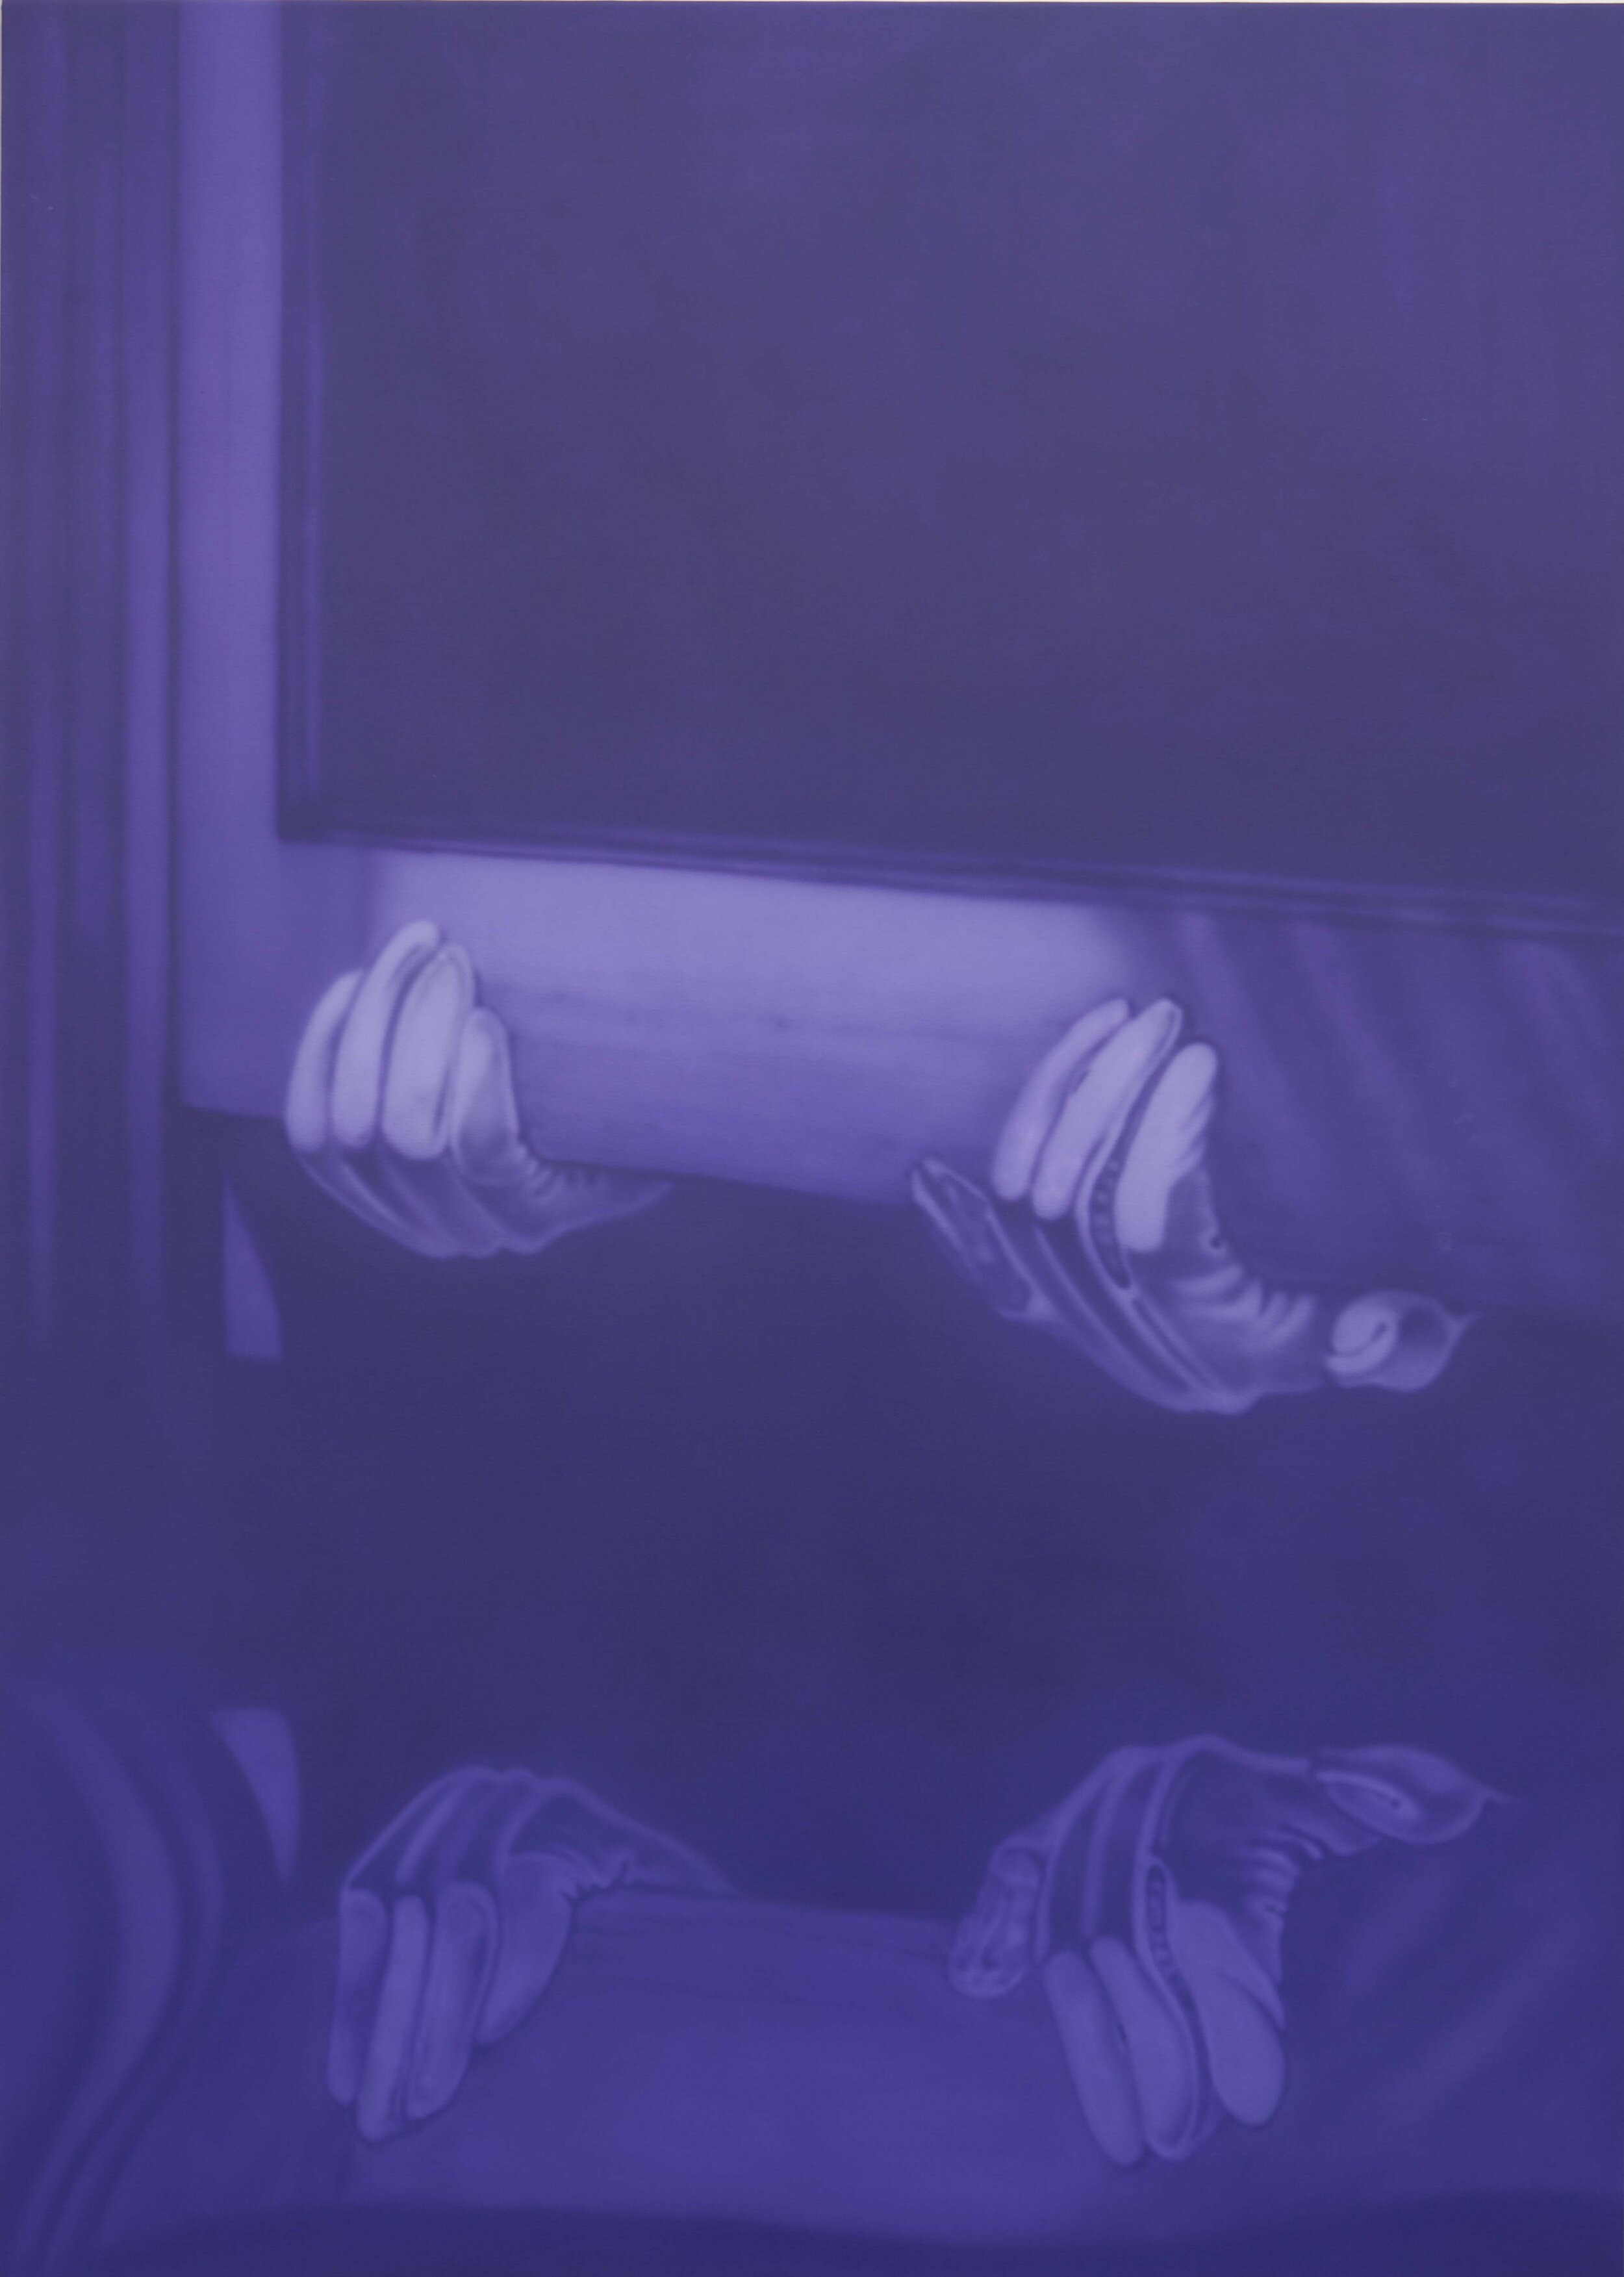   Thief Painting in Violet,  2014. Acrylic on canvas. 84 x 60 inches 